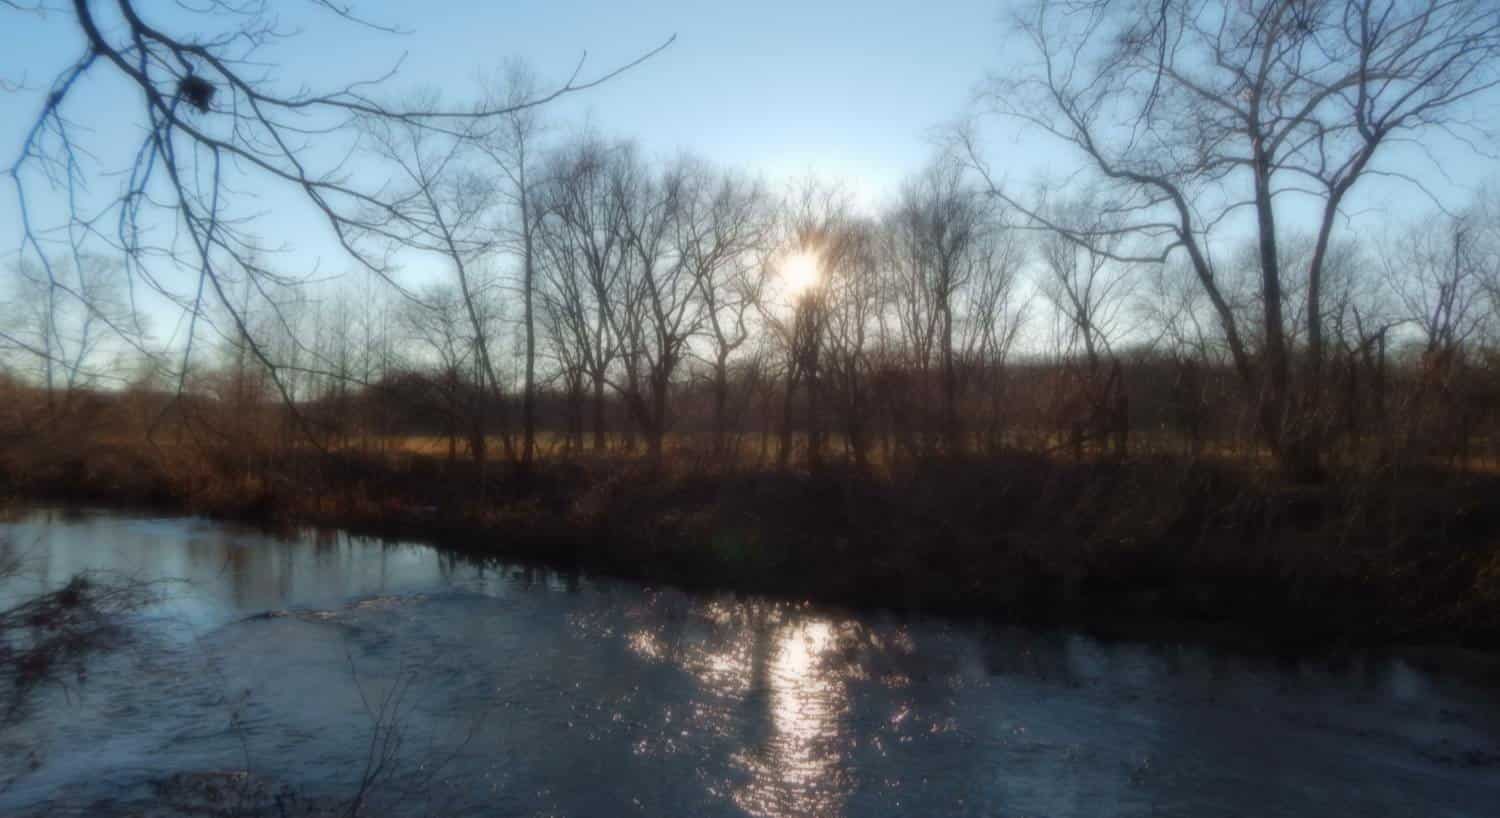 Calm river with trees and no leaves lining the banks with a meadow and more trees and the sun shining brighltly in the background